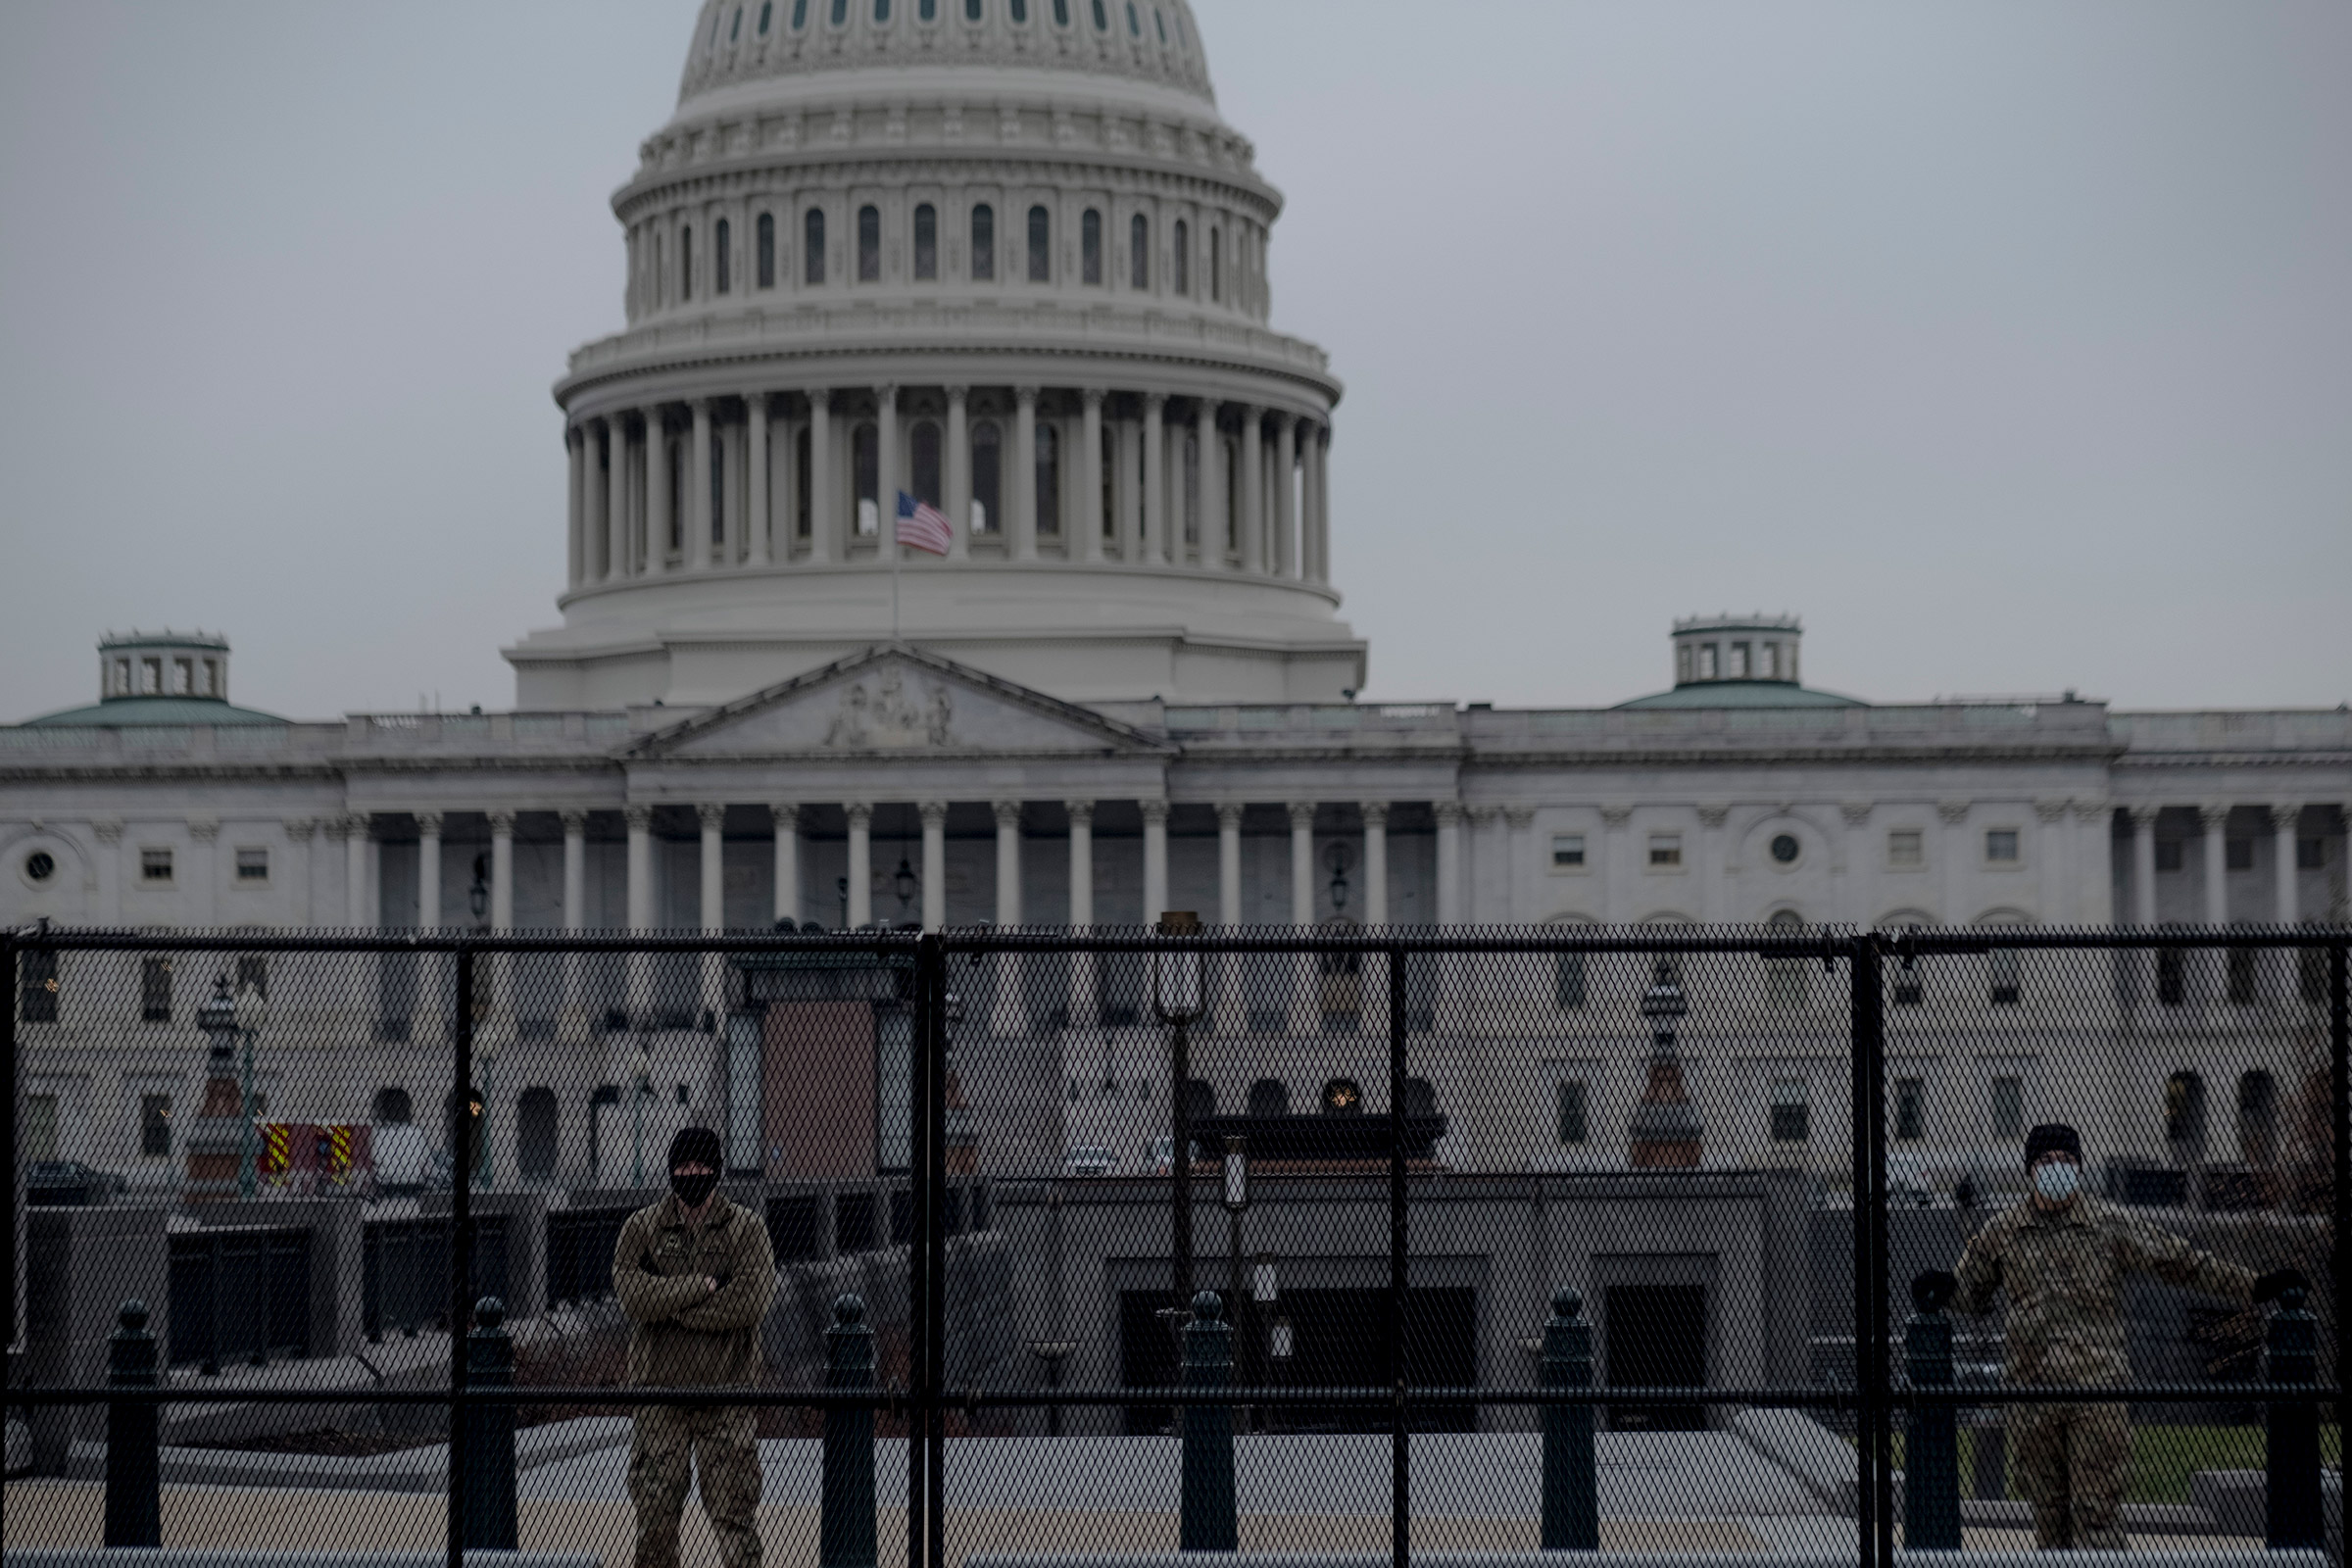 1/11/21, Washington, D.C.Members of the National Guard form a perimeter around the Capitol in Washington, D.C. on Jan. 11, 2020. Gabriella Demczuk / TIME